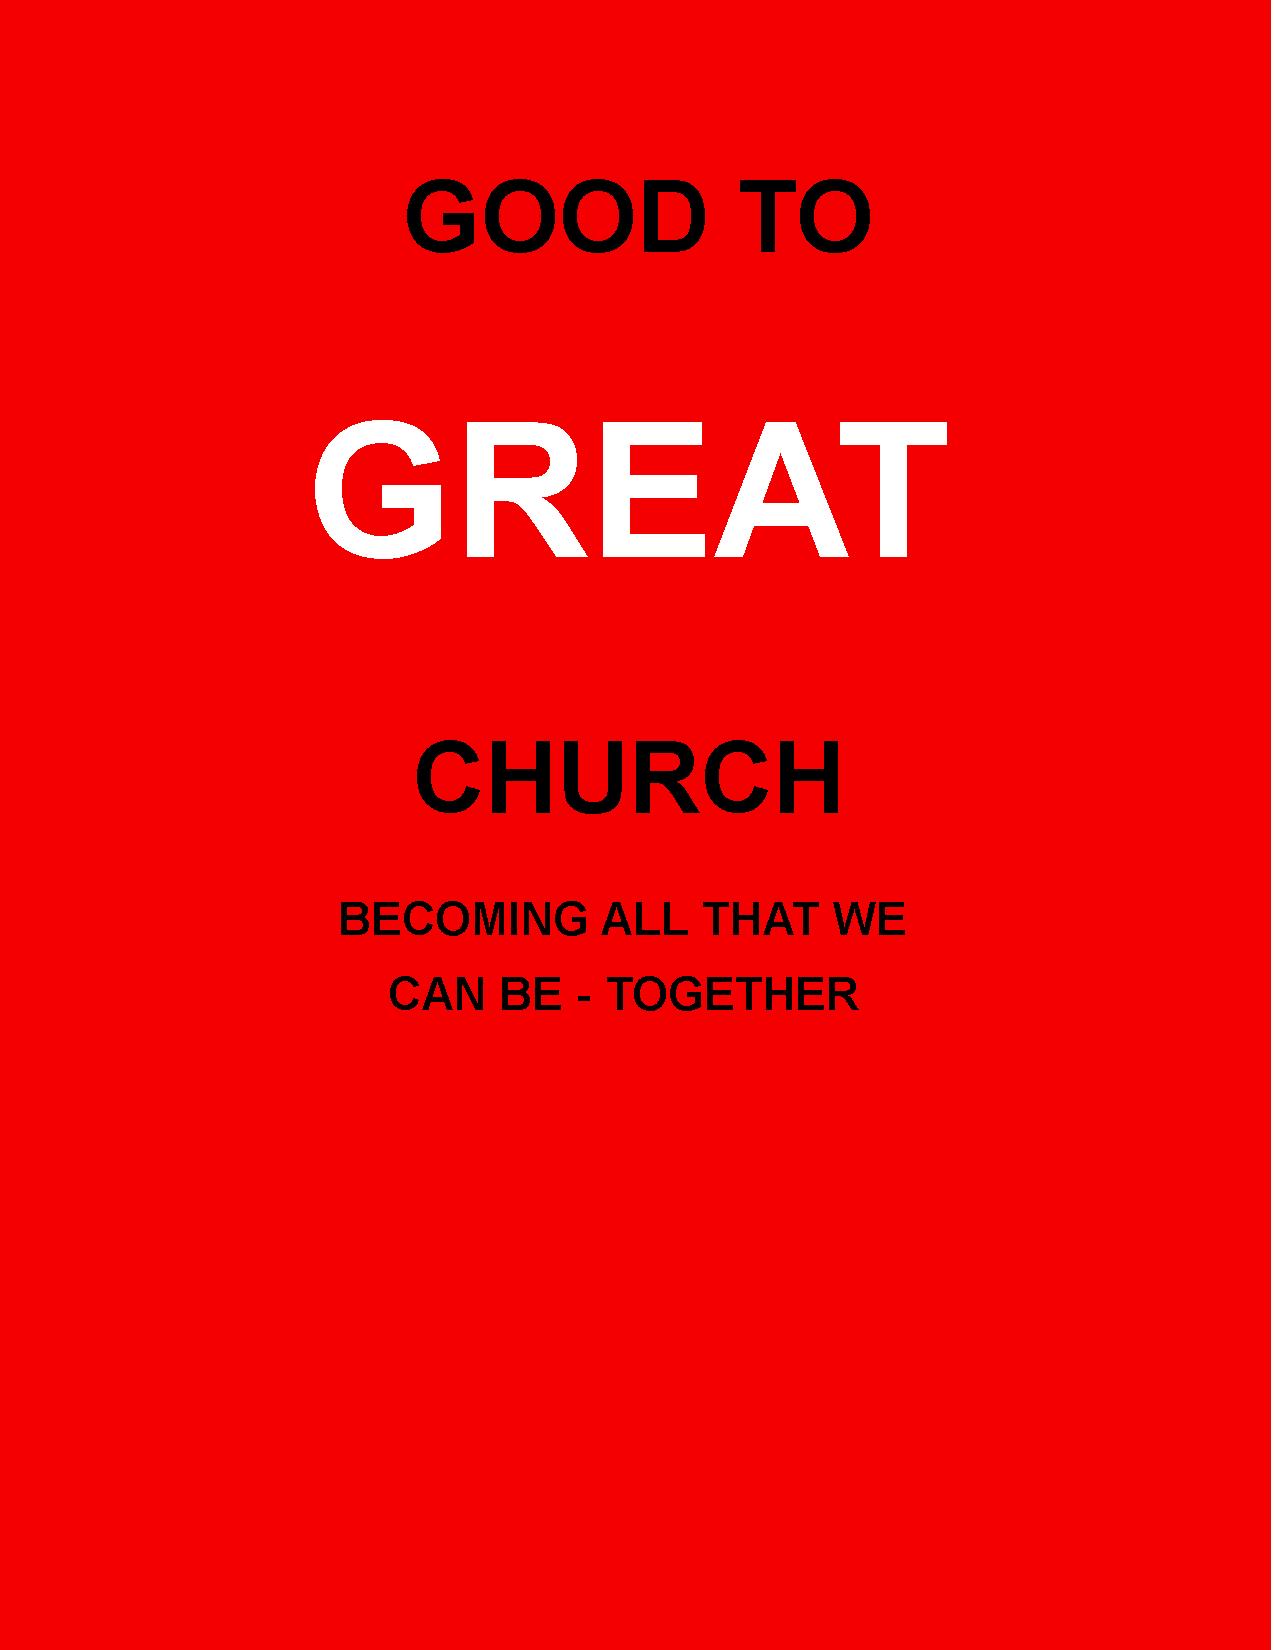 Becoming a Church of Great Hope